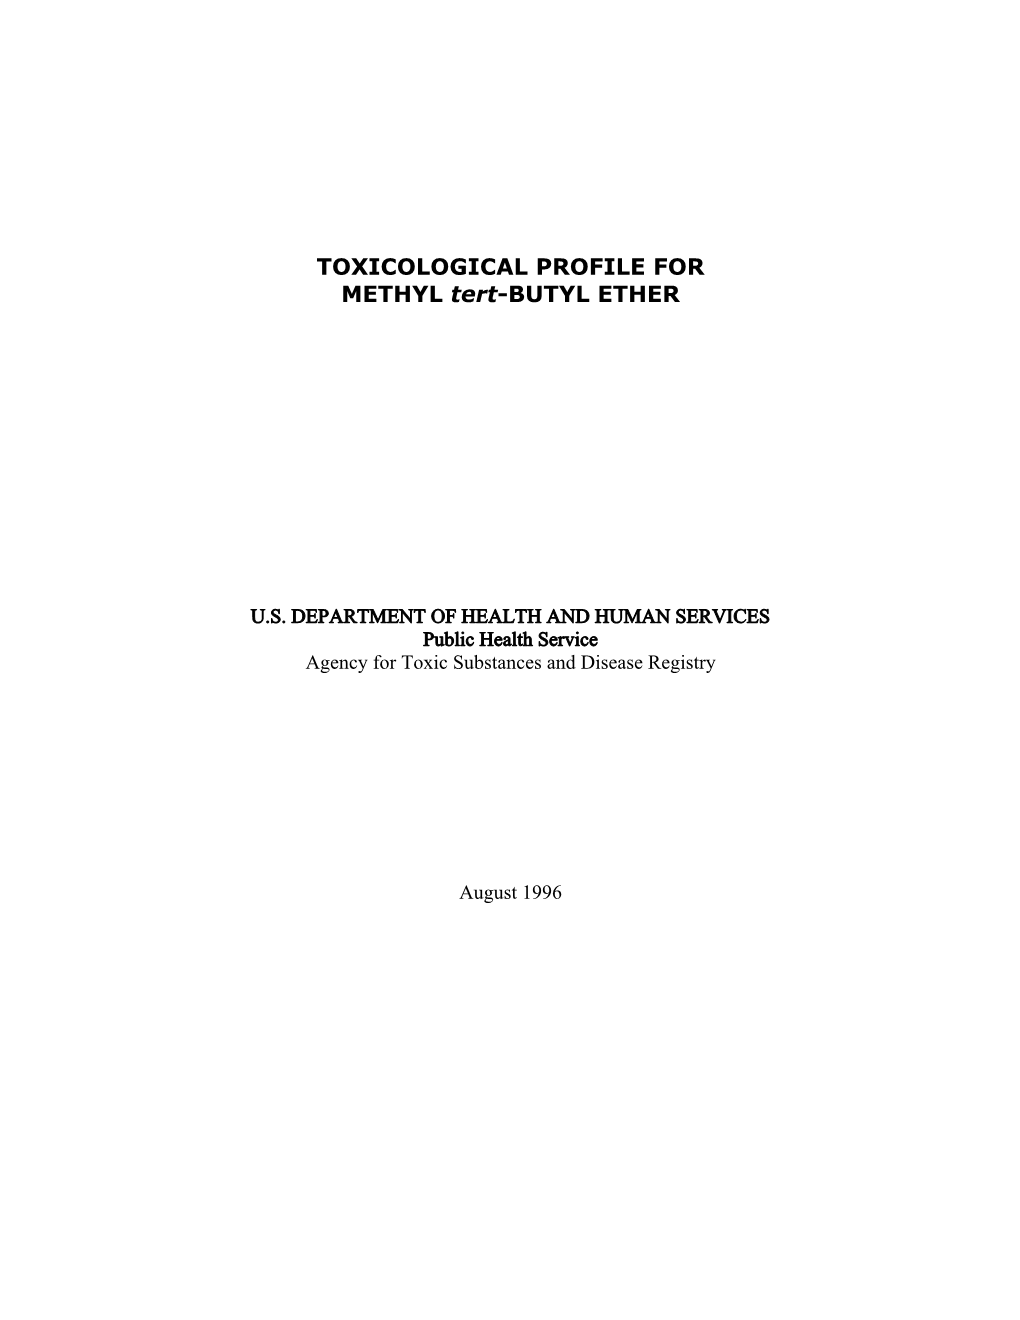 TOXICOLOGICAL PROFILE for METHYL Tert-BUTYL ETHER